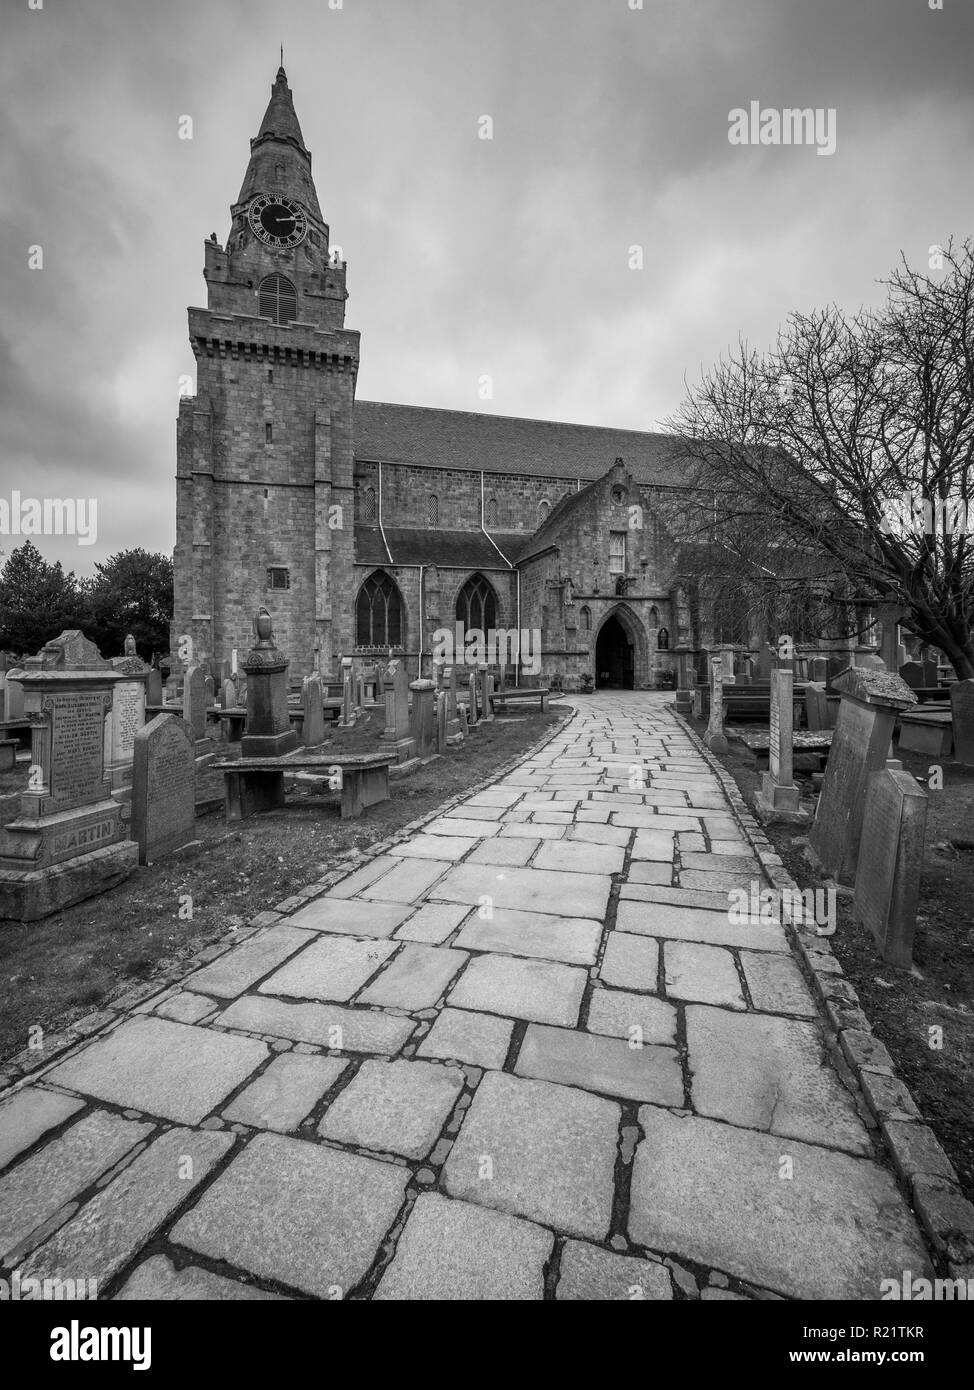 St. Machar cathedral in Aberdeen Scotland shot on a cloudy day. Stock Photo